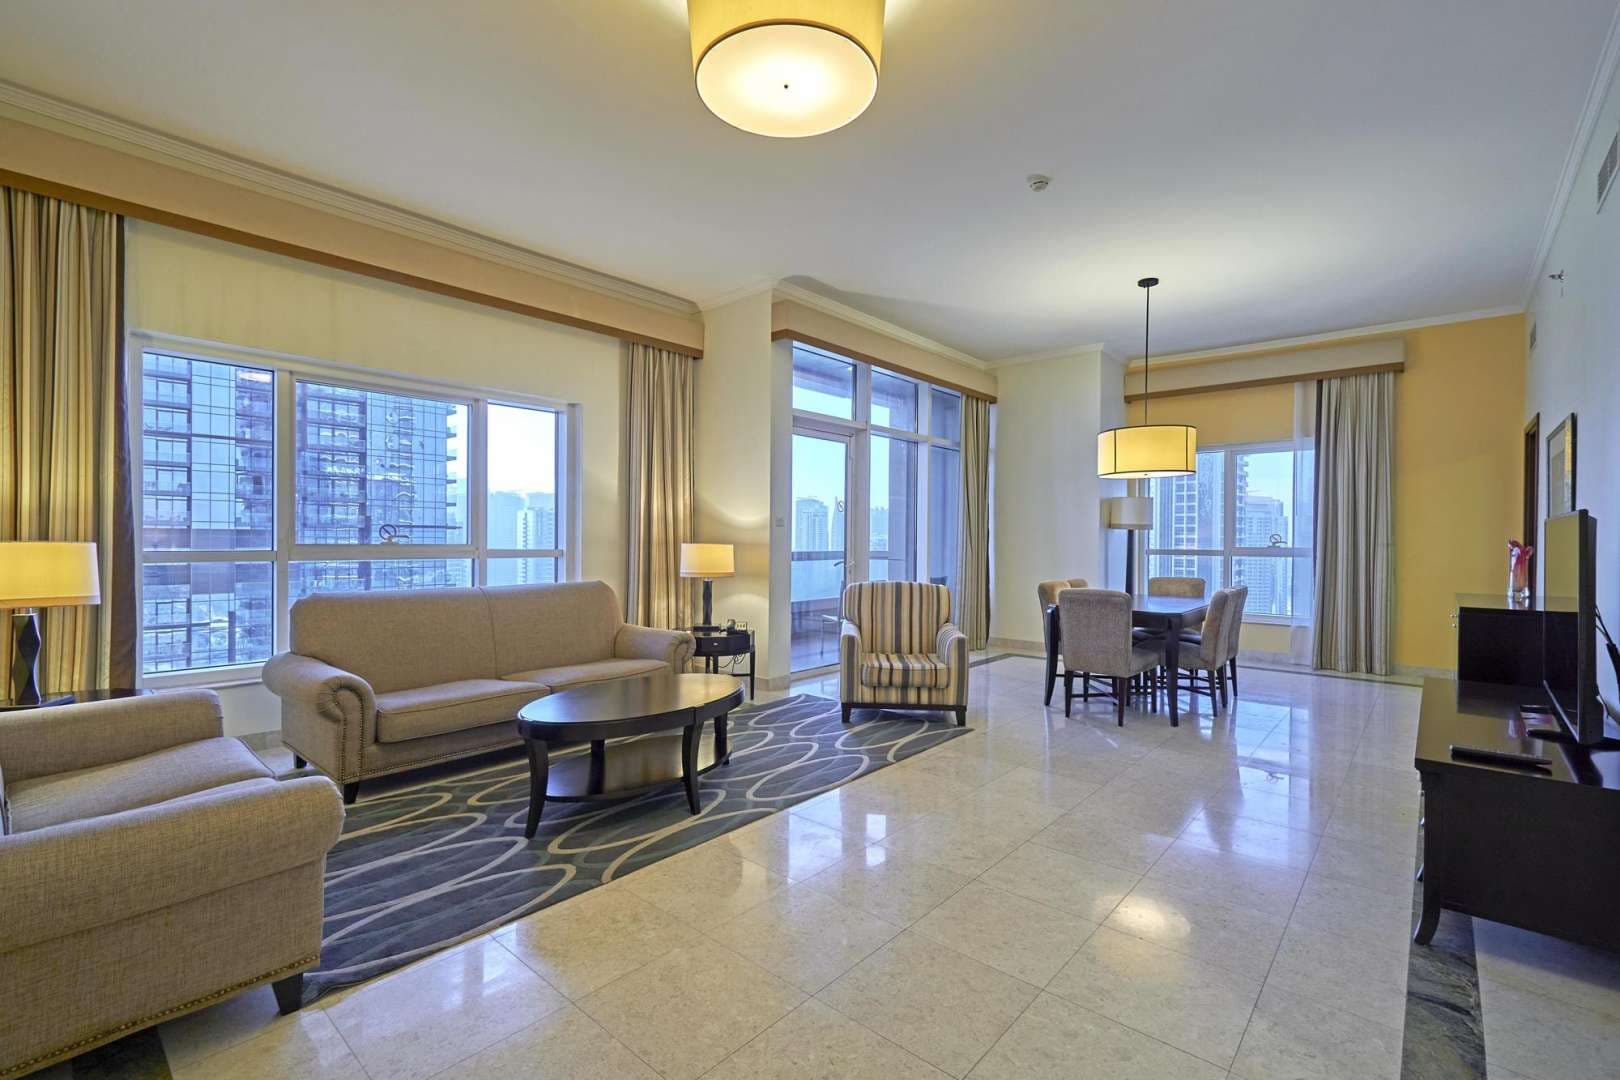 2 Bedroom Serviced Residences For Short Term Marriott Harbour Hotel And Suites Lp05699 A5e7706eef5f780.jpg